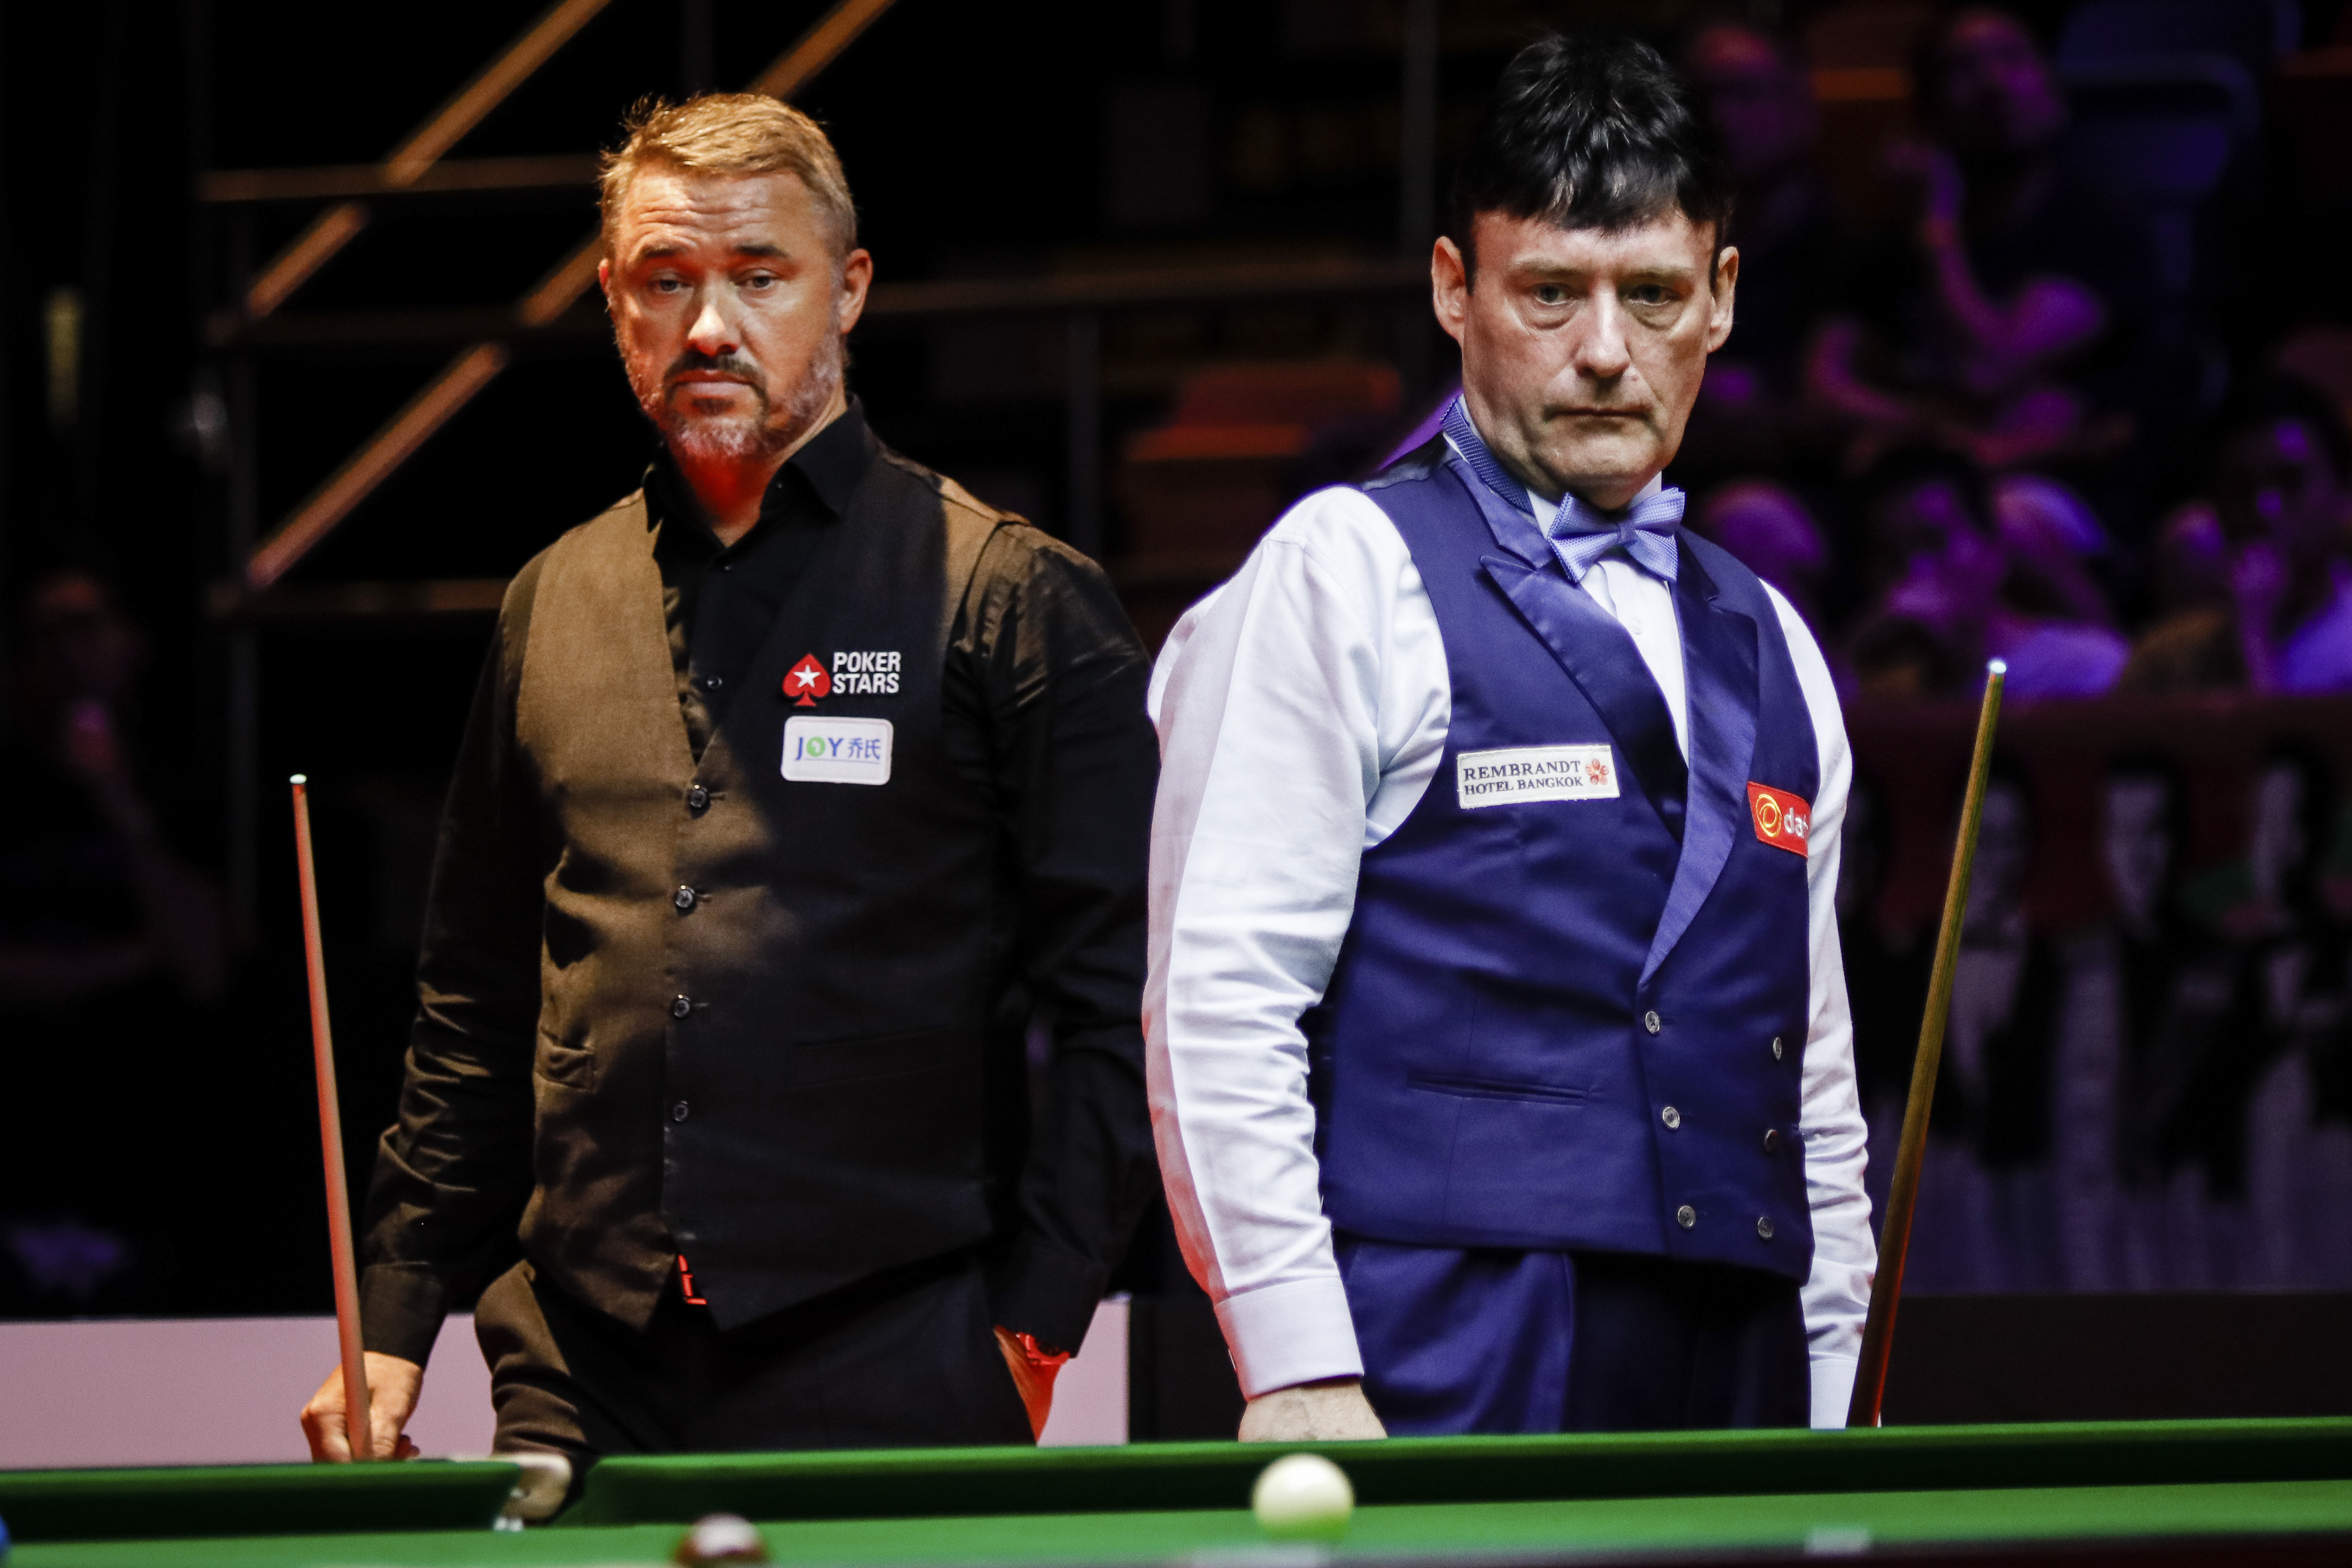 Watch UK Seniors Snooker Championship LIVE Jimmy White, Ken Doherty and John Parrott in action - Live